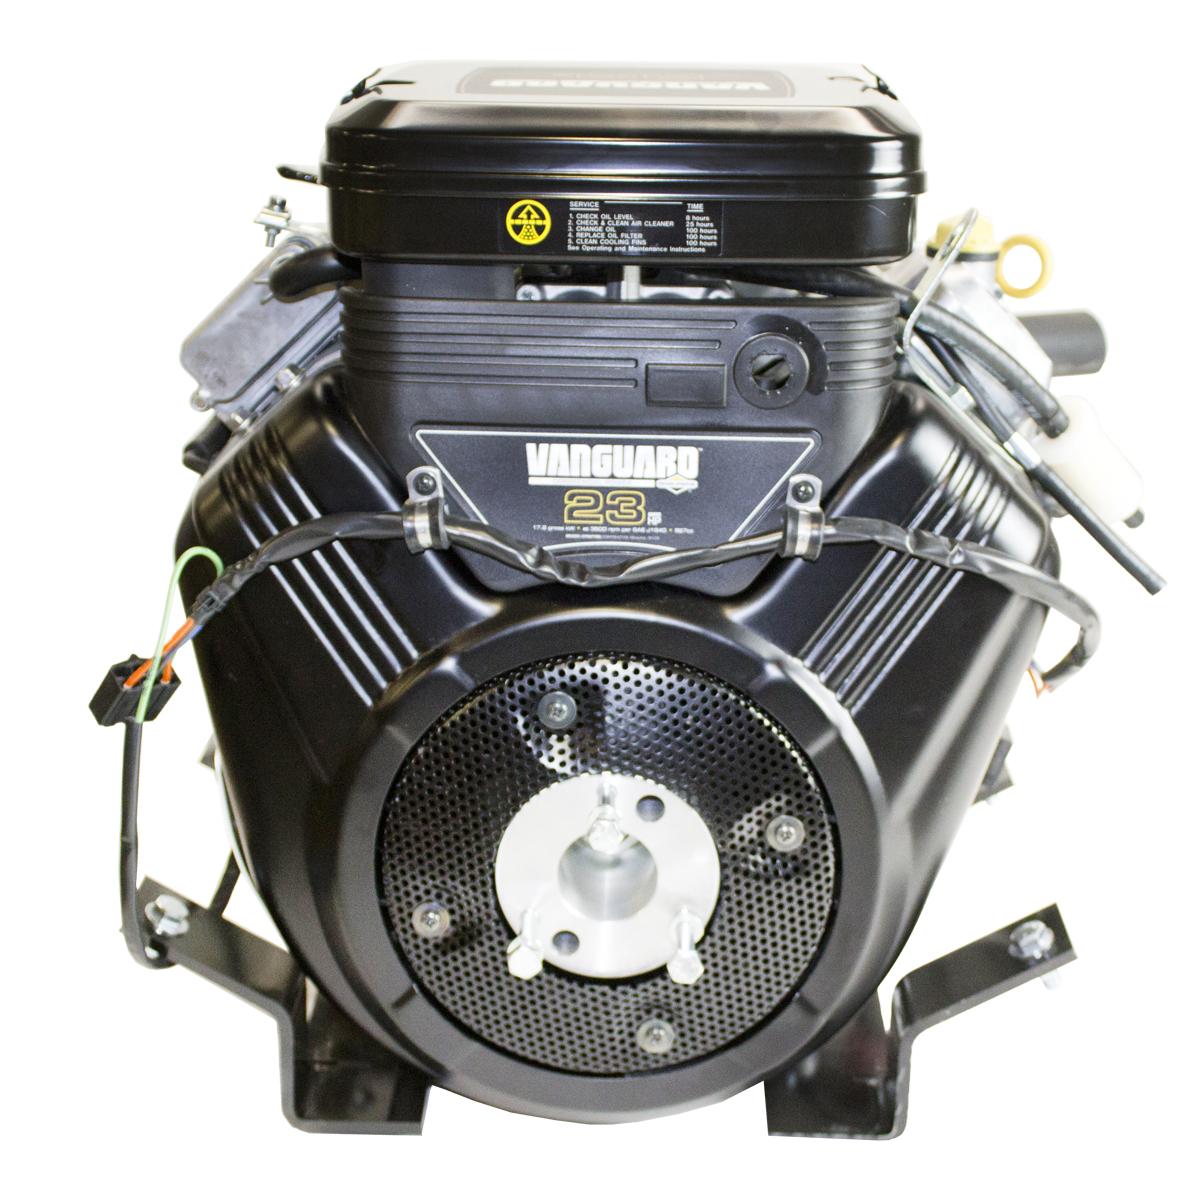 23hp Vanguard OHV V-Twin with kit to fit into a carbureted JD425 with Kawasaki FD620D, Briggs & Stratton